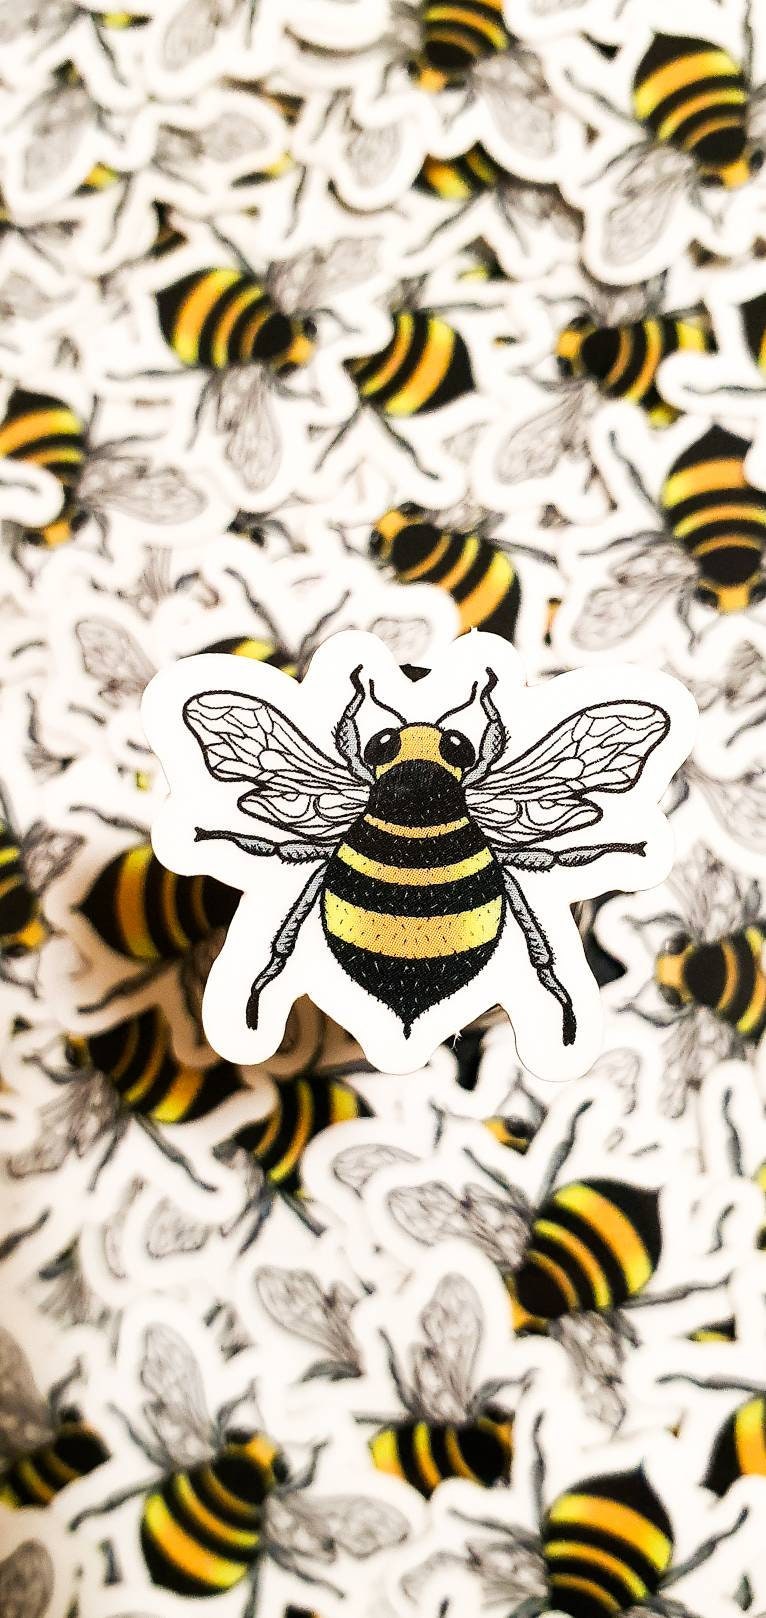 Bumble Bee Stickers